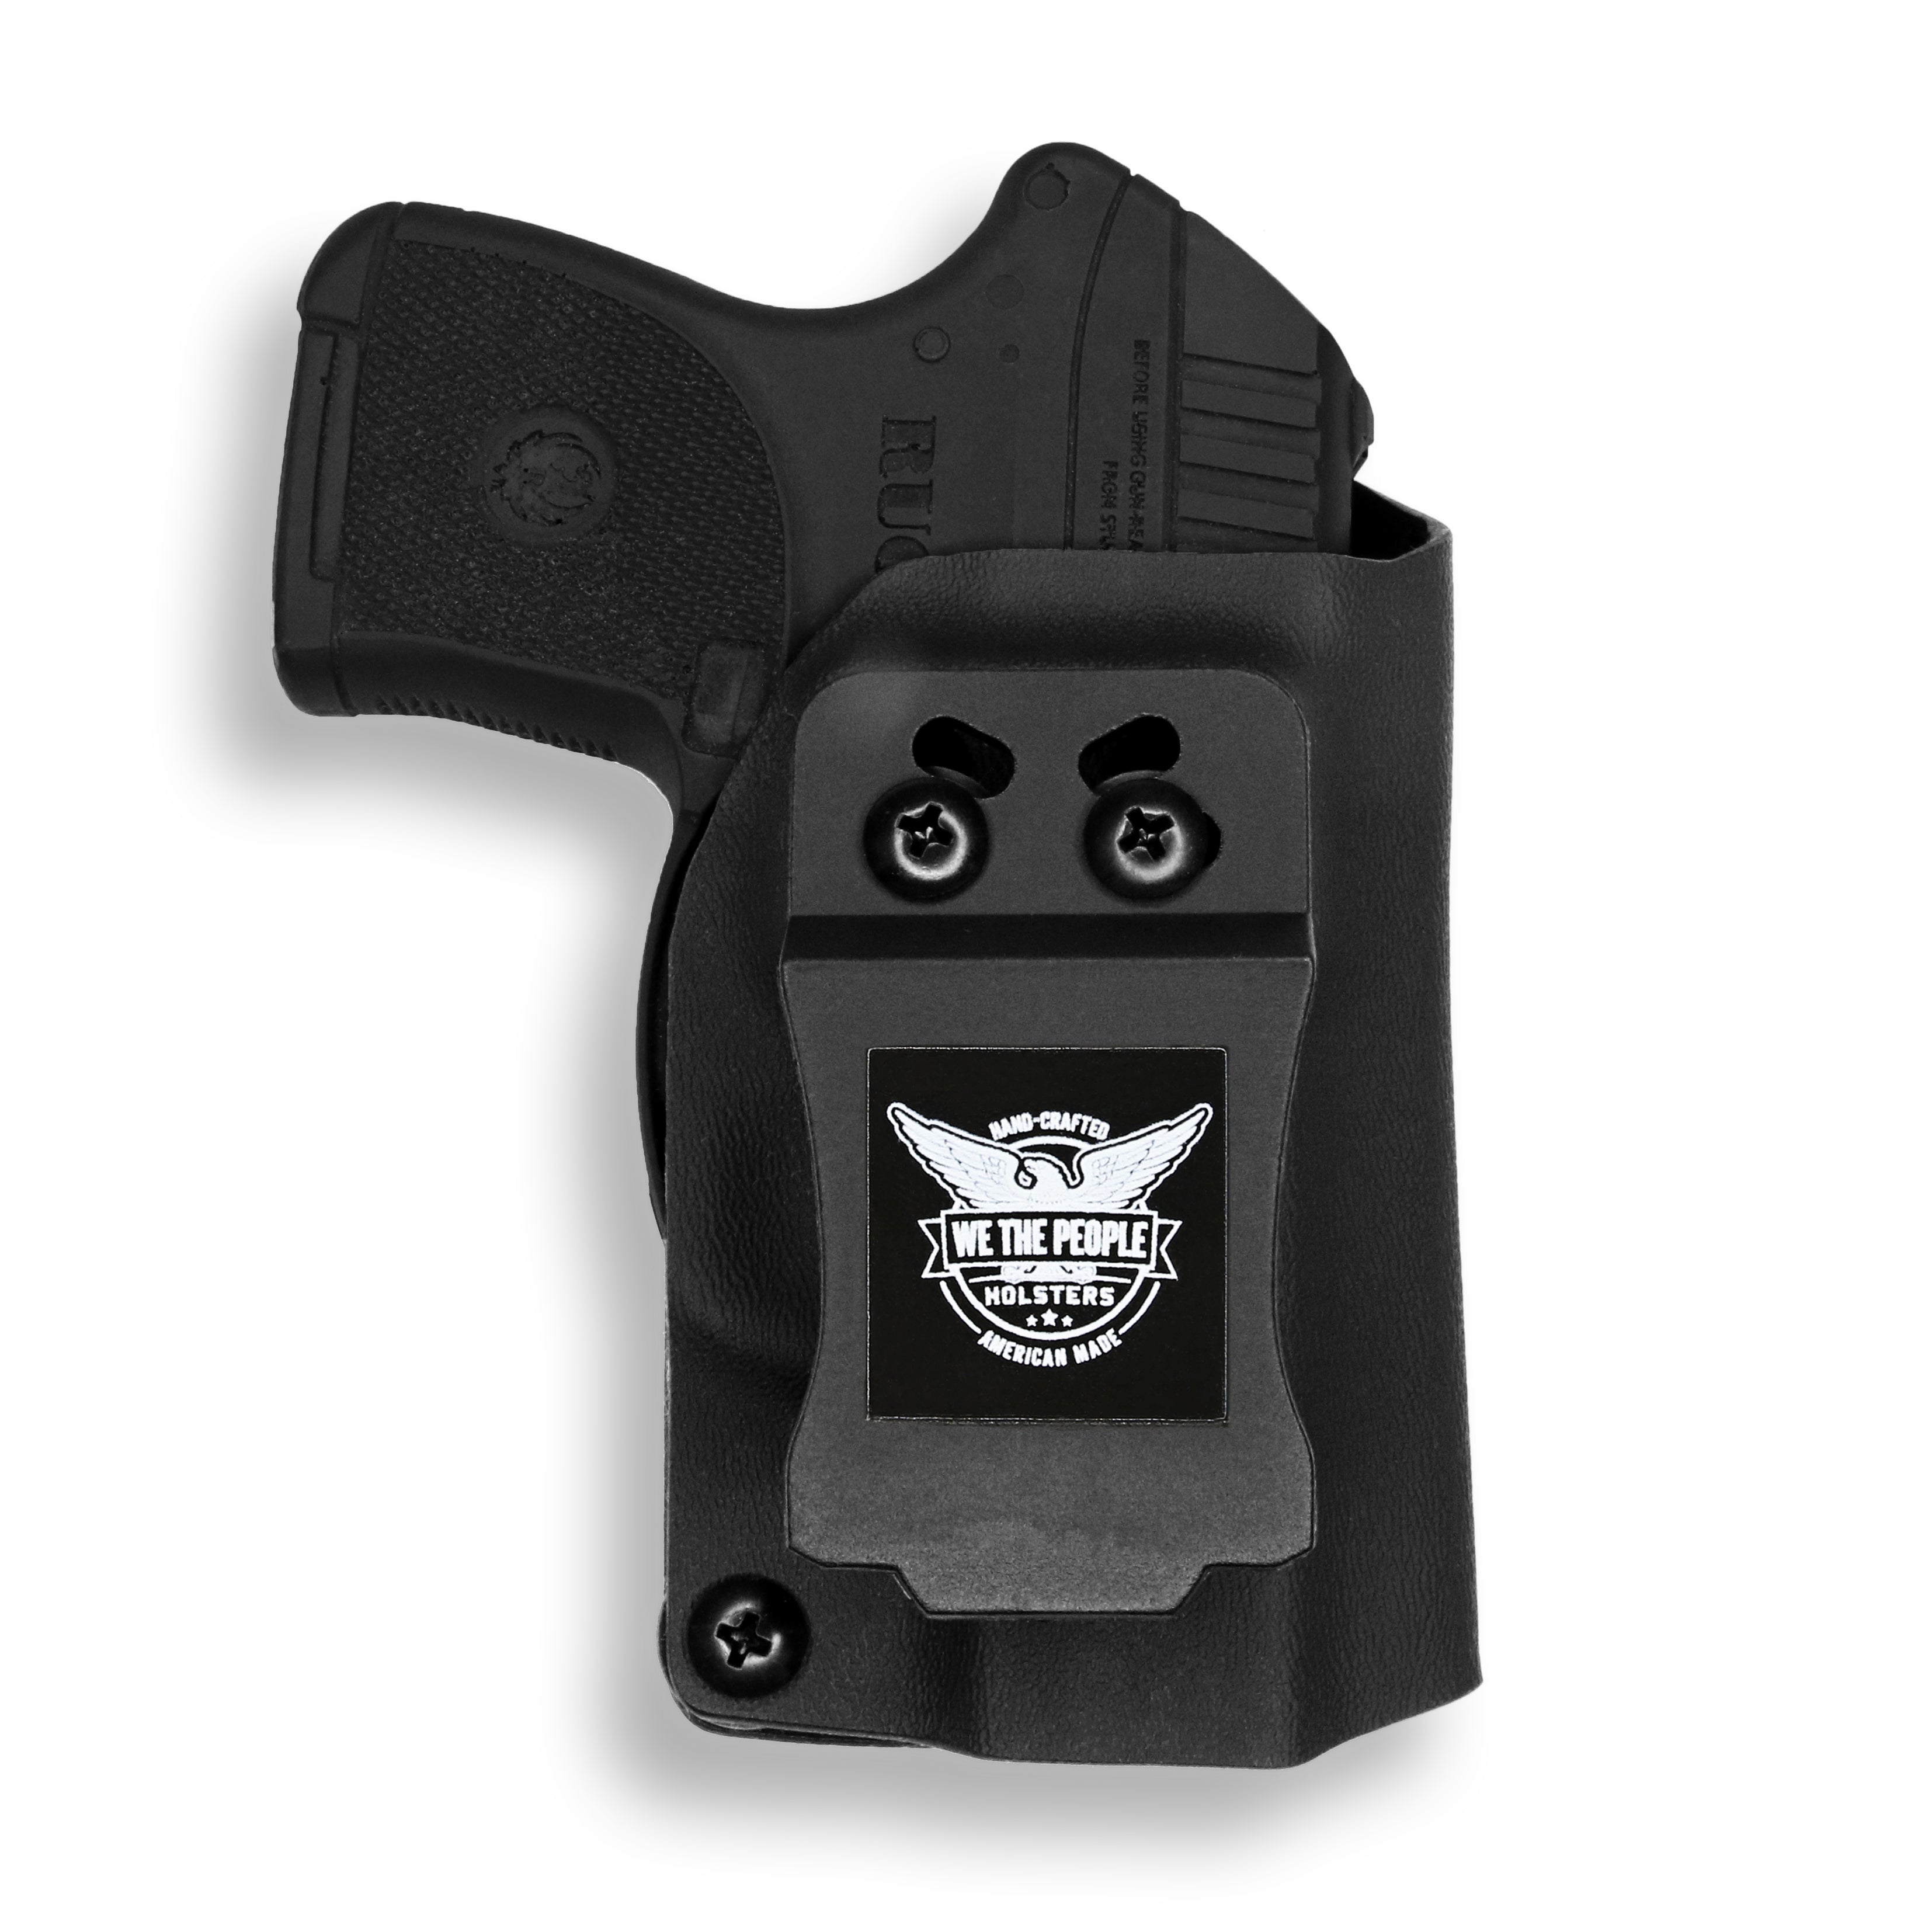  Ruger LCP Holster, IWB Kydex Holster Fits: Ruger LCP .380  Pistol - Not Fit LCP II .380/LCP II .22 LR/LCP MAX, Inside Waistband  Concealed Carry, Adj. Cant & 'Posi-Click' Retention